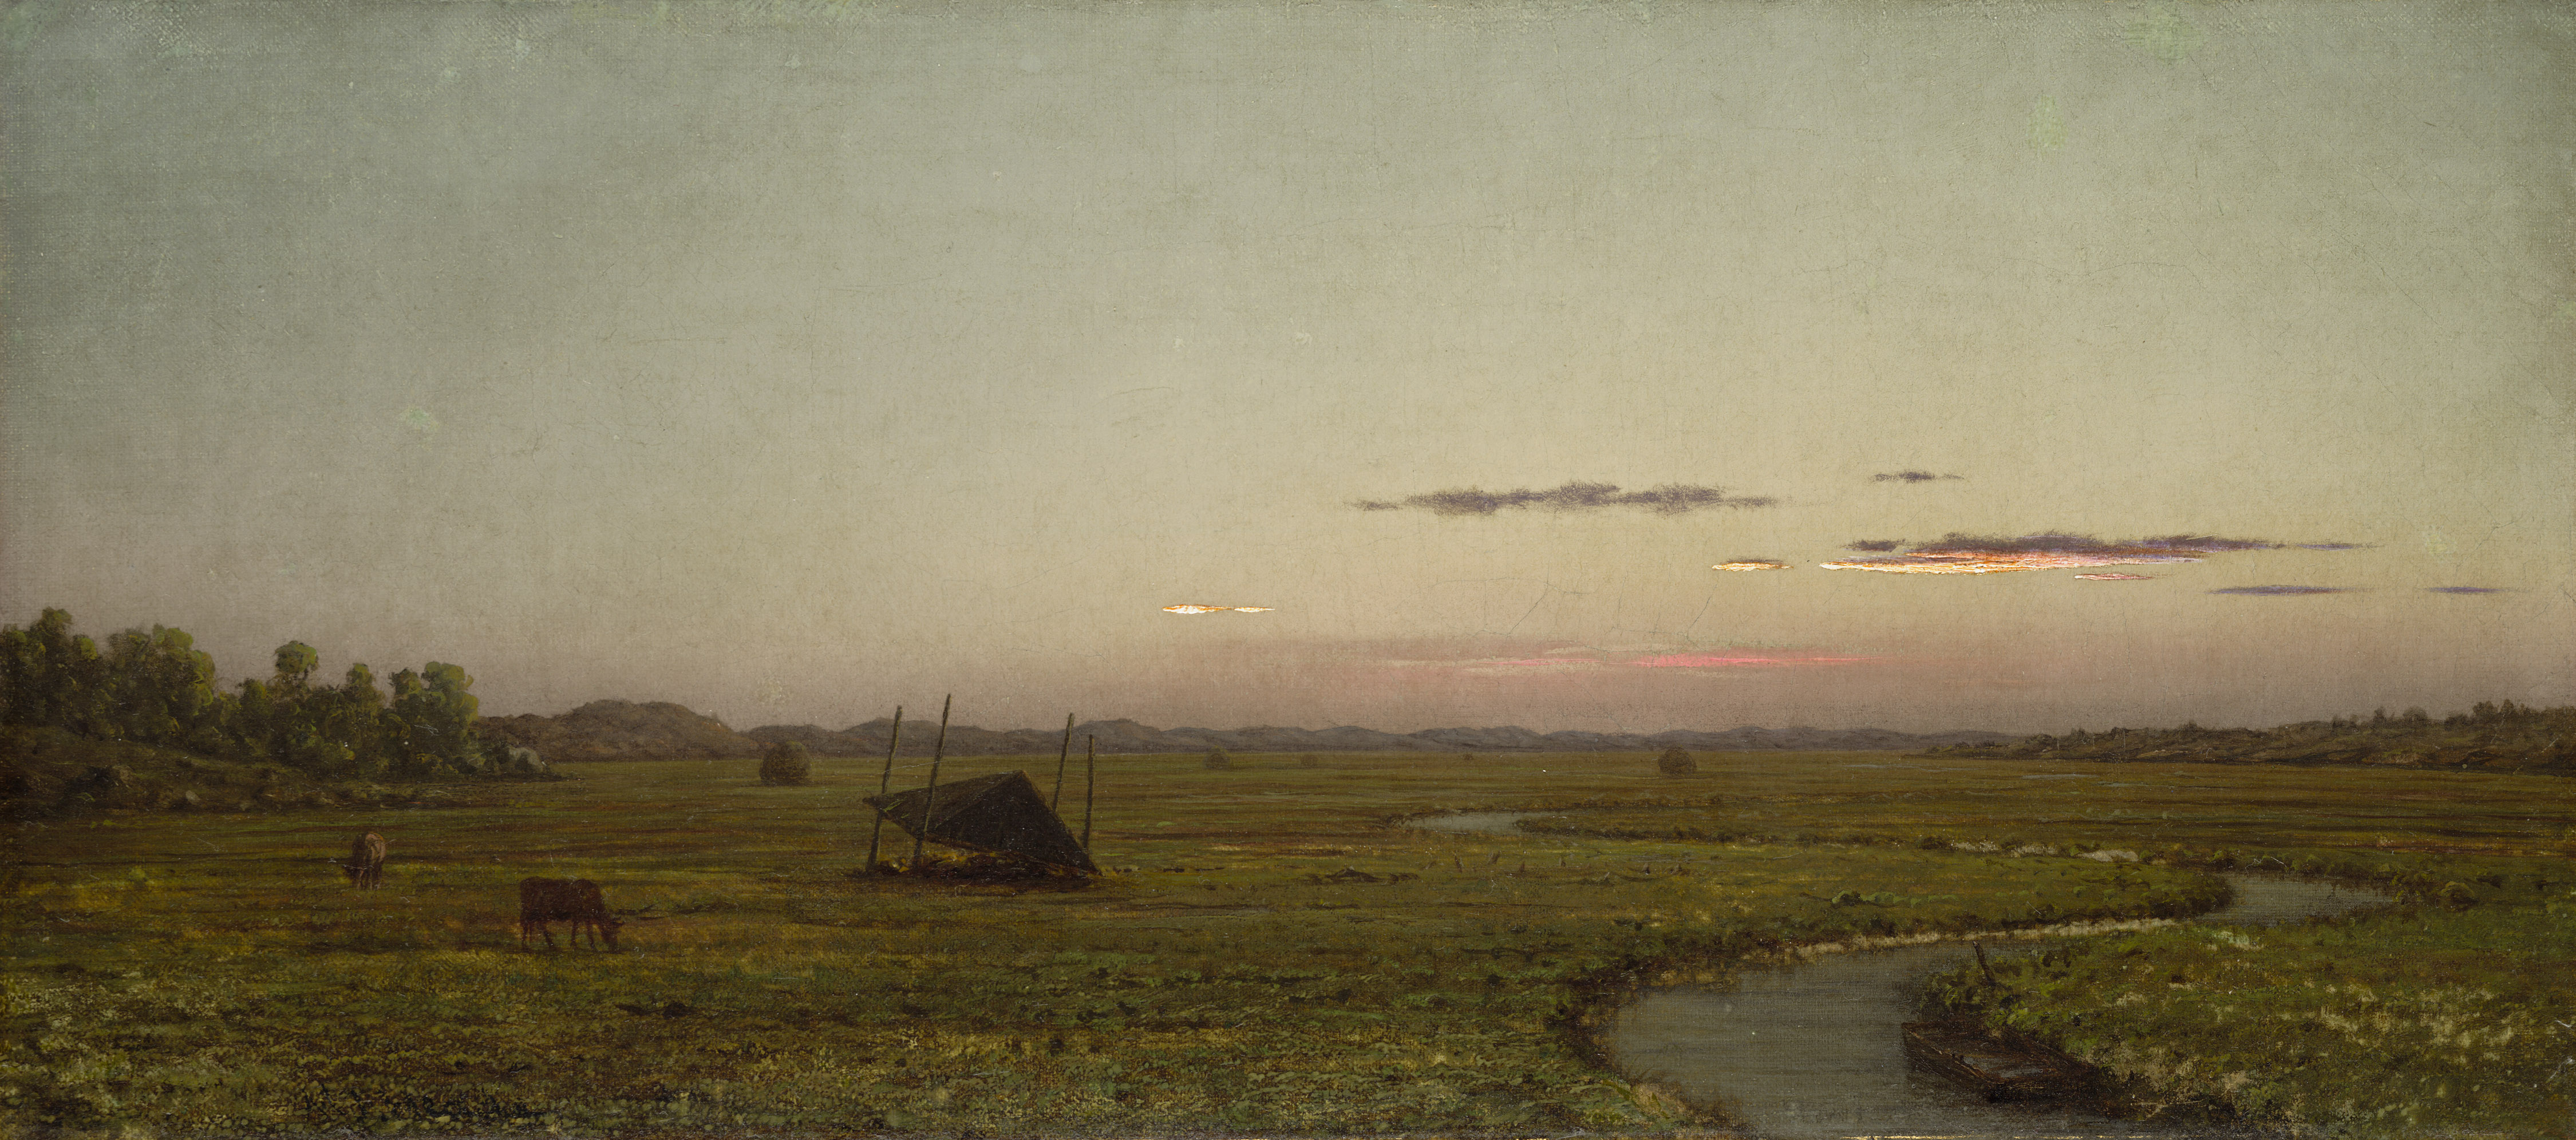 Winding River, Sunset by Martin Johnson Heade - 1863 - 10 3/16 x 22 3/16 in. Wadsworth Atheneum Museum of Art